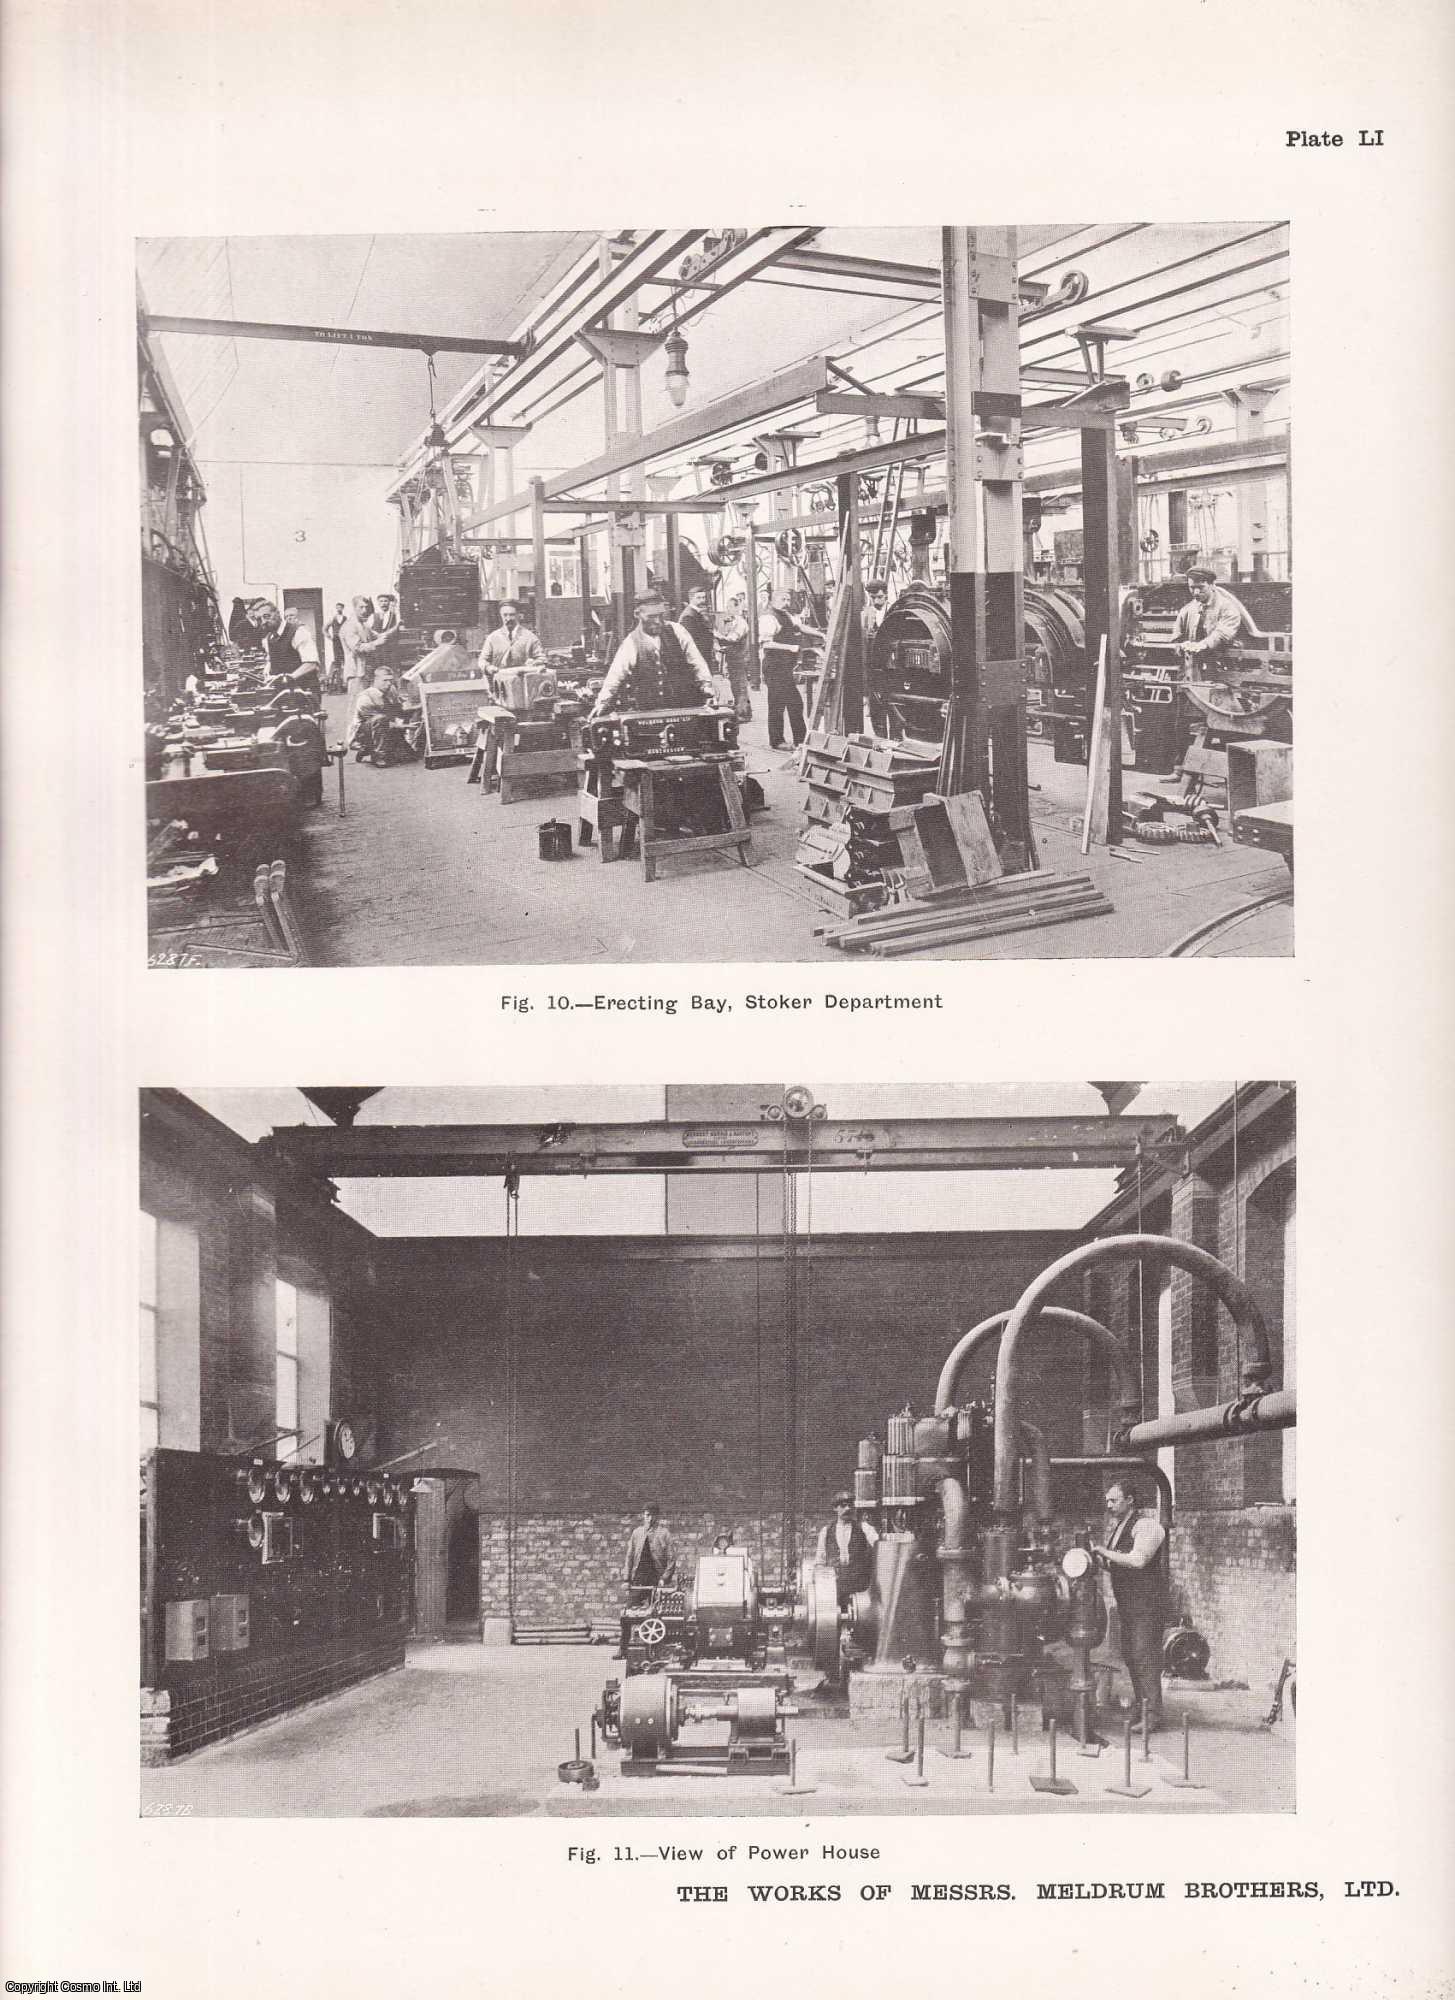 No Author Stated - The Works of Messrs. Meldrum Brothers Ltd. An original article from Engineering, 1903.